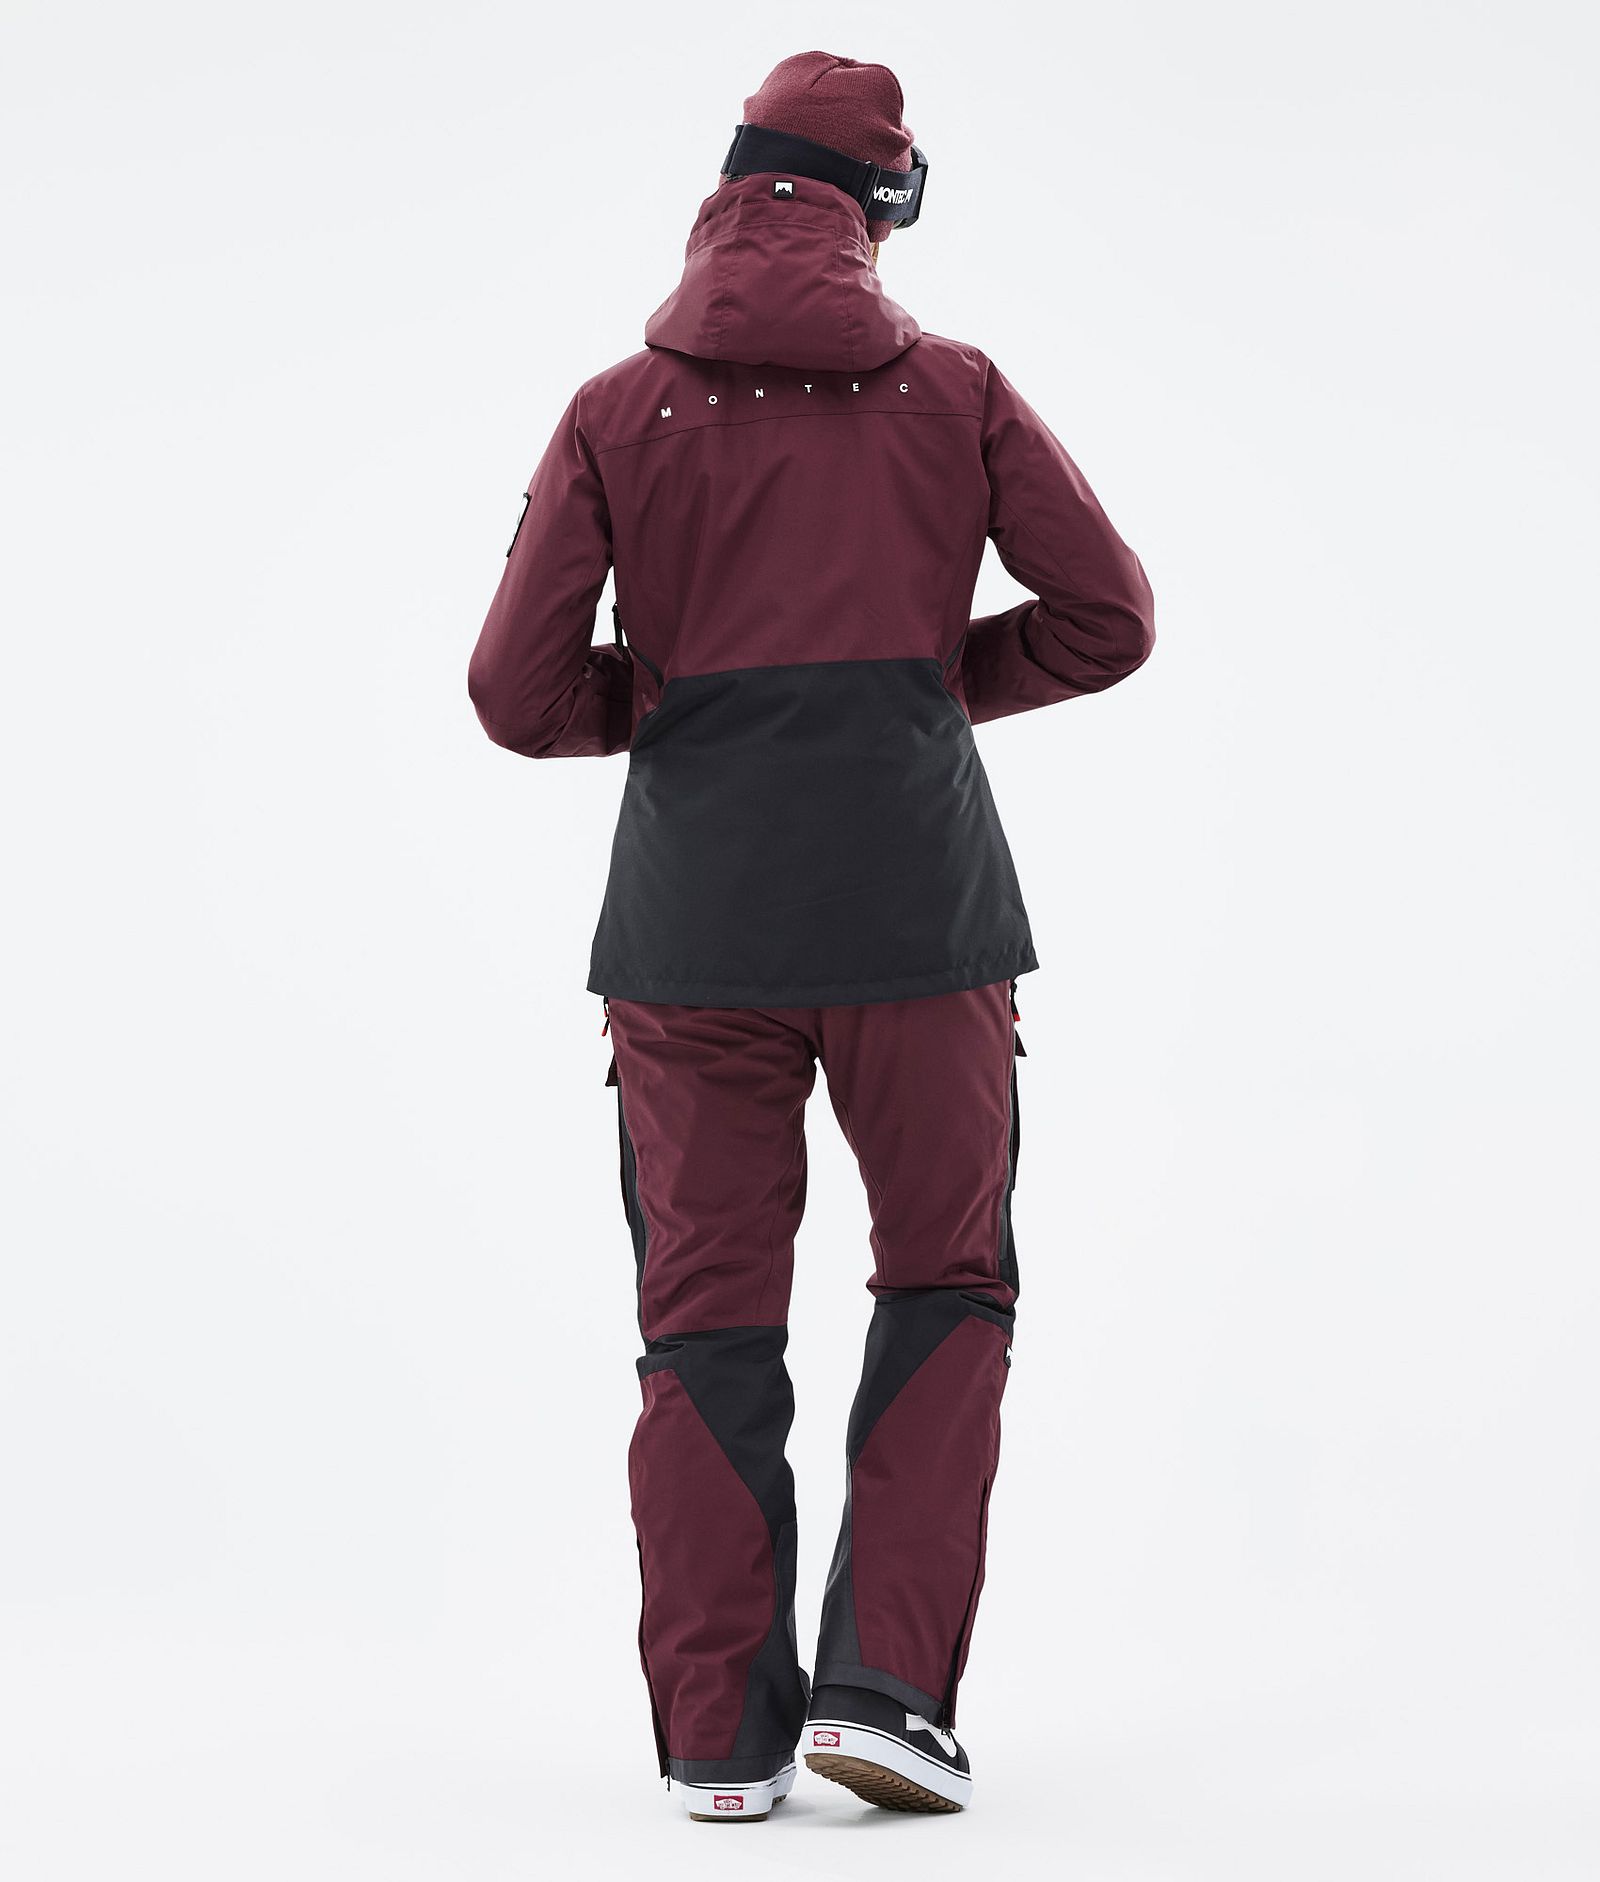 Montec Moss W Outfit de Snowboard Mujer Burgundy/Black